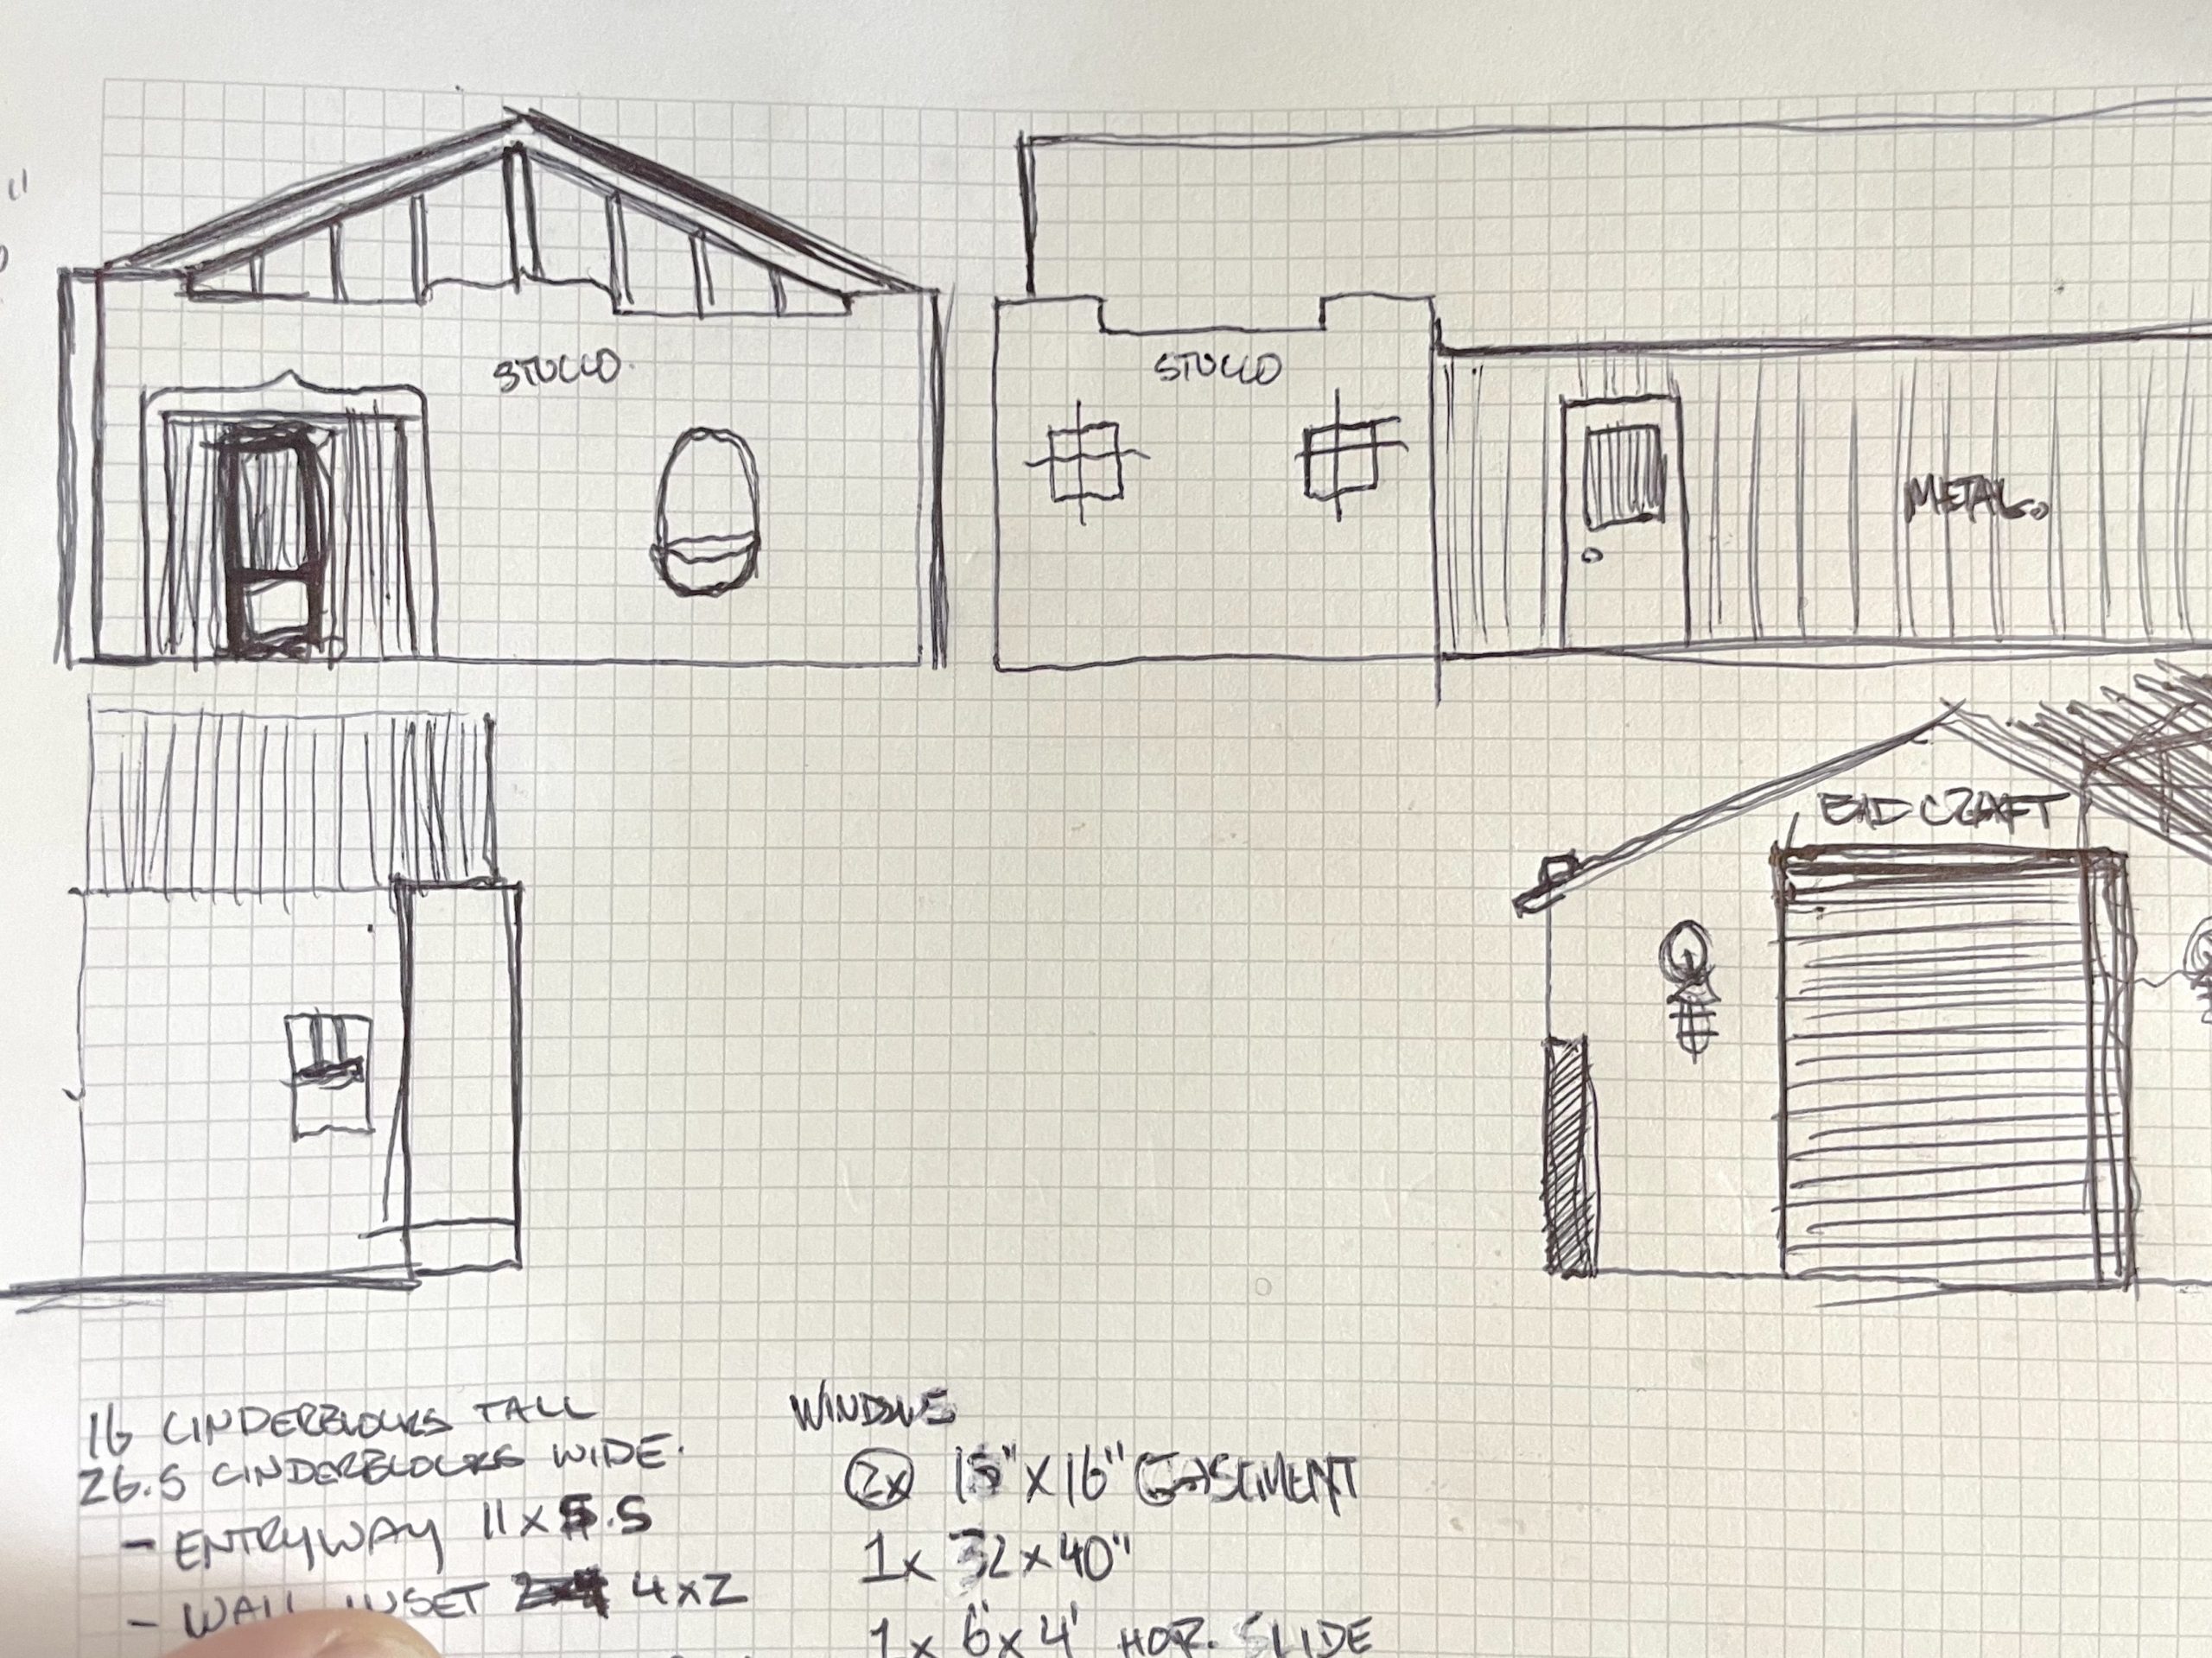 rough ideation of an augmented prefab metal workshop to satisfy historic preservation 